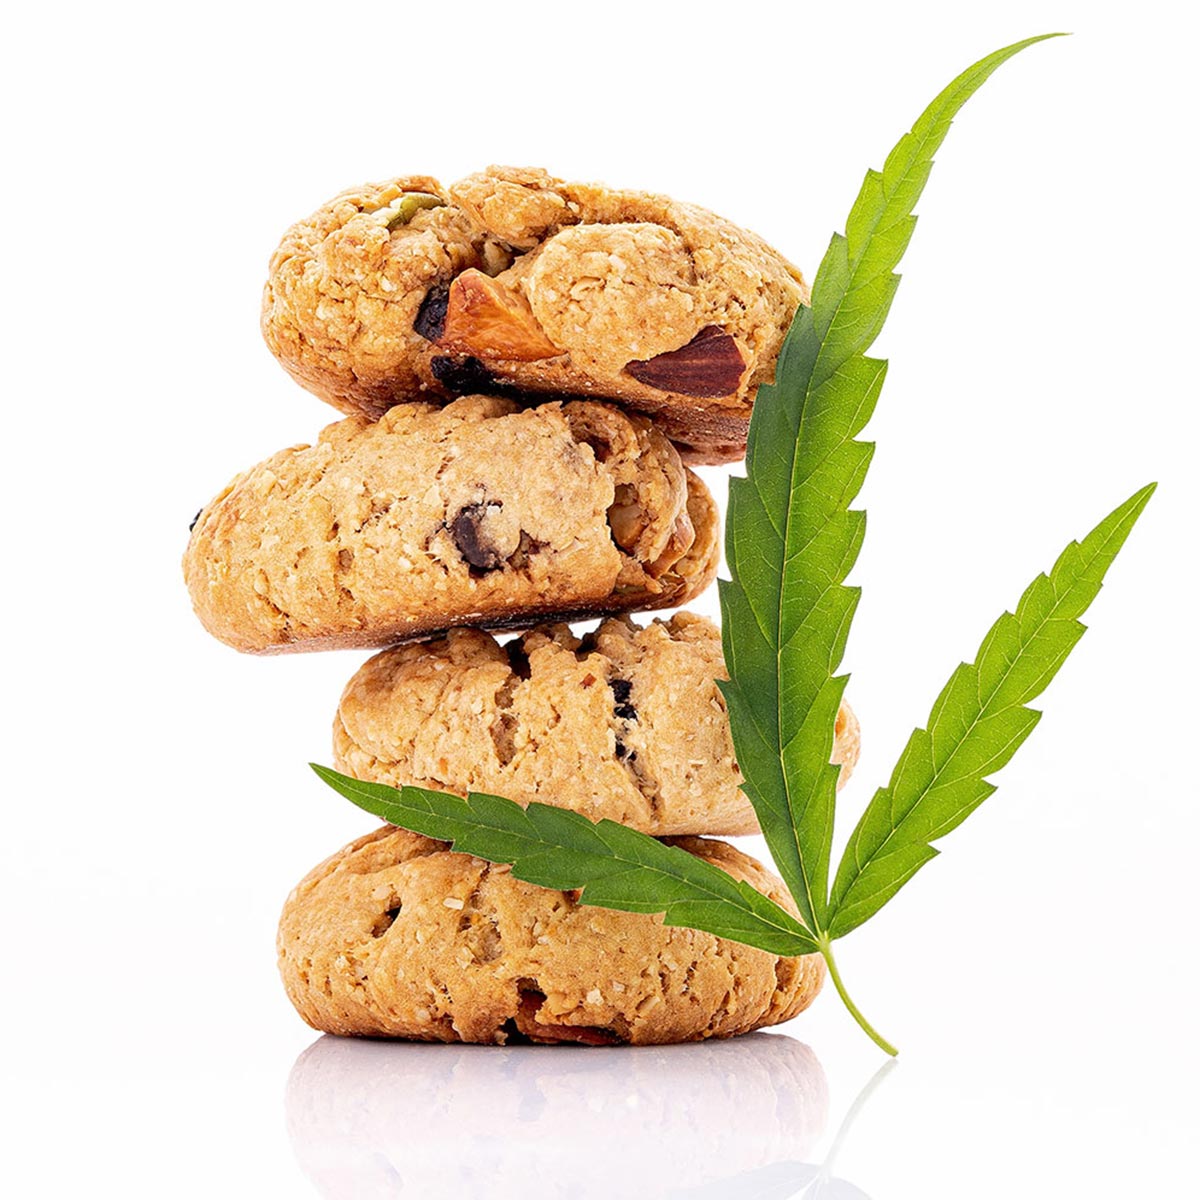 Making delicious cannabis and CBD edibles is easy